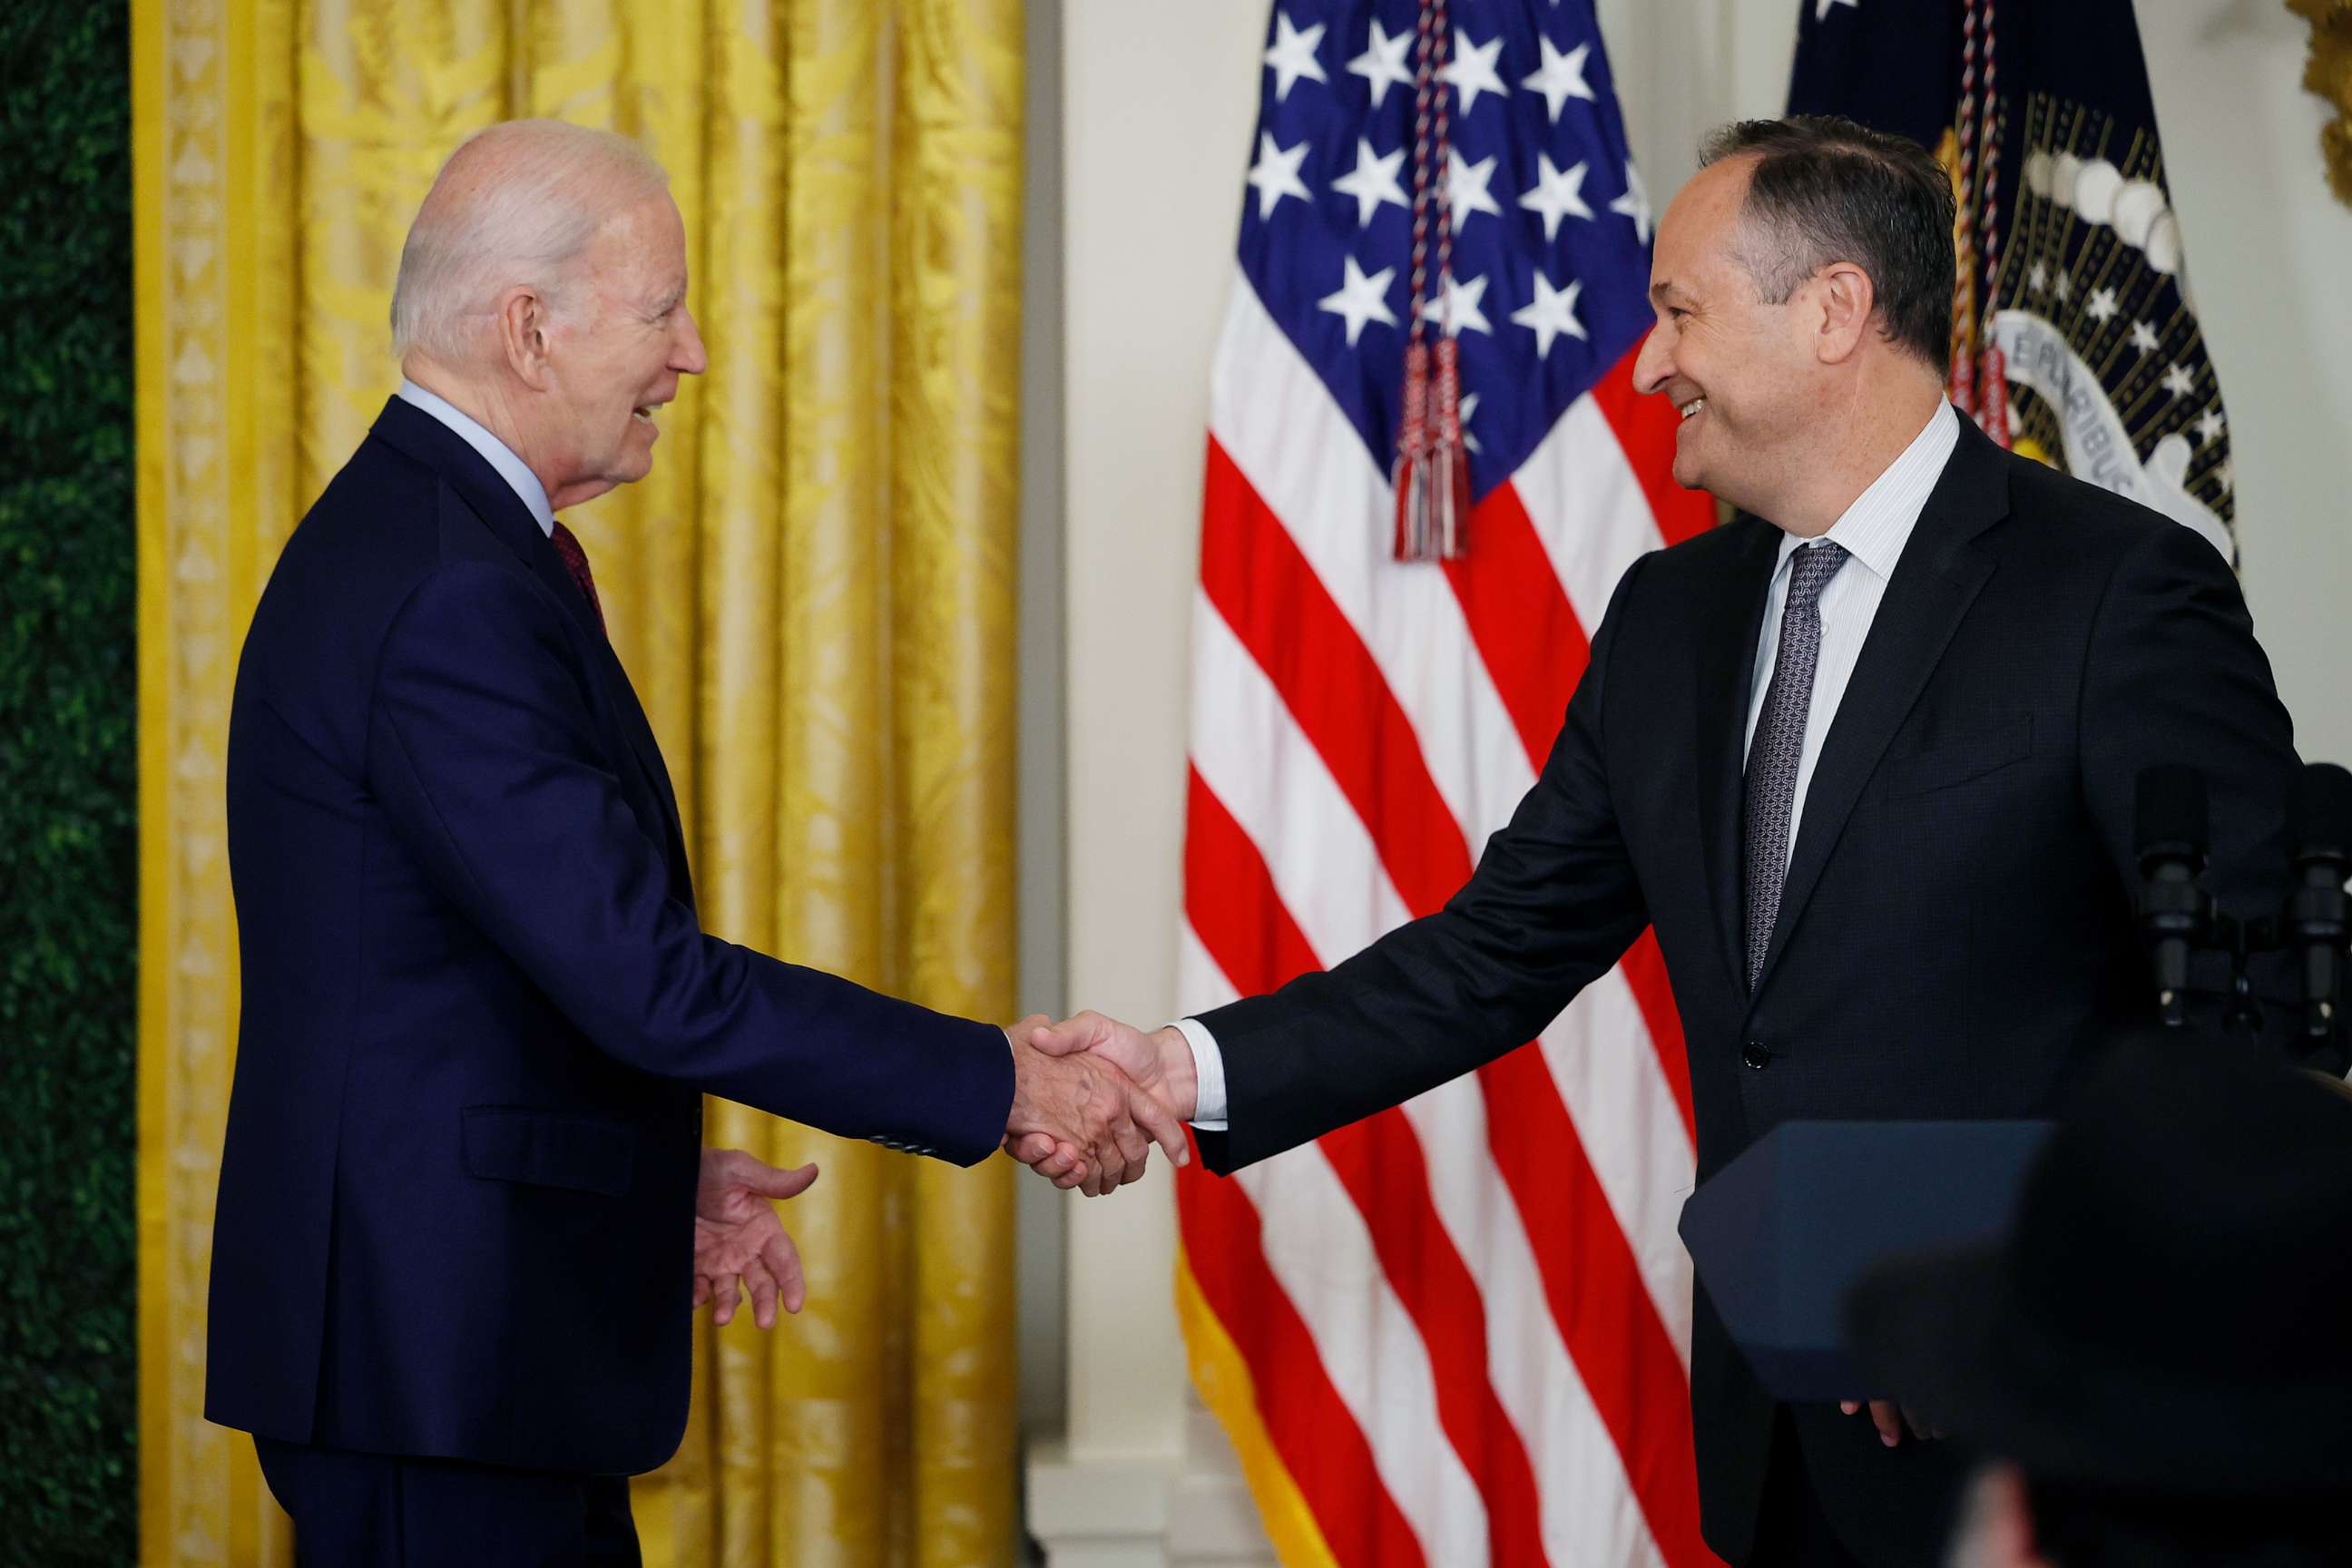 PHOTO: President Joe Biden is introduced by second gentleman Doug Emhoff during a celebration marking Jewish American Heritage Month in the East Room of the White House on May 16, 2023 in Washington, DC.